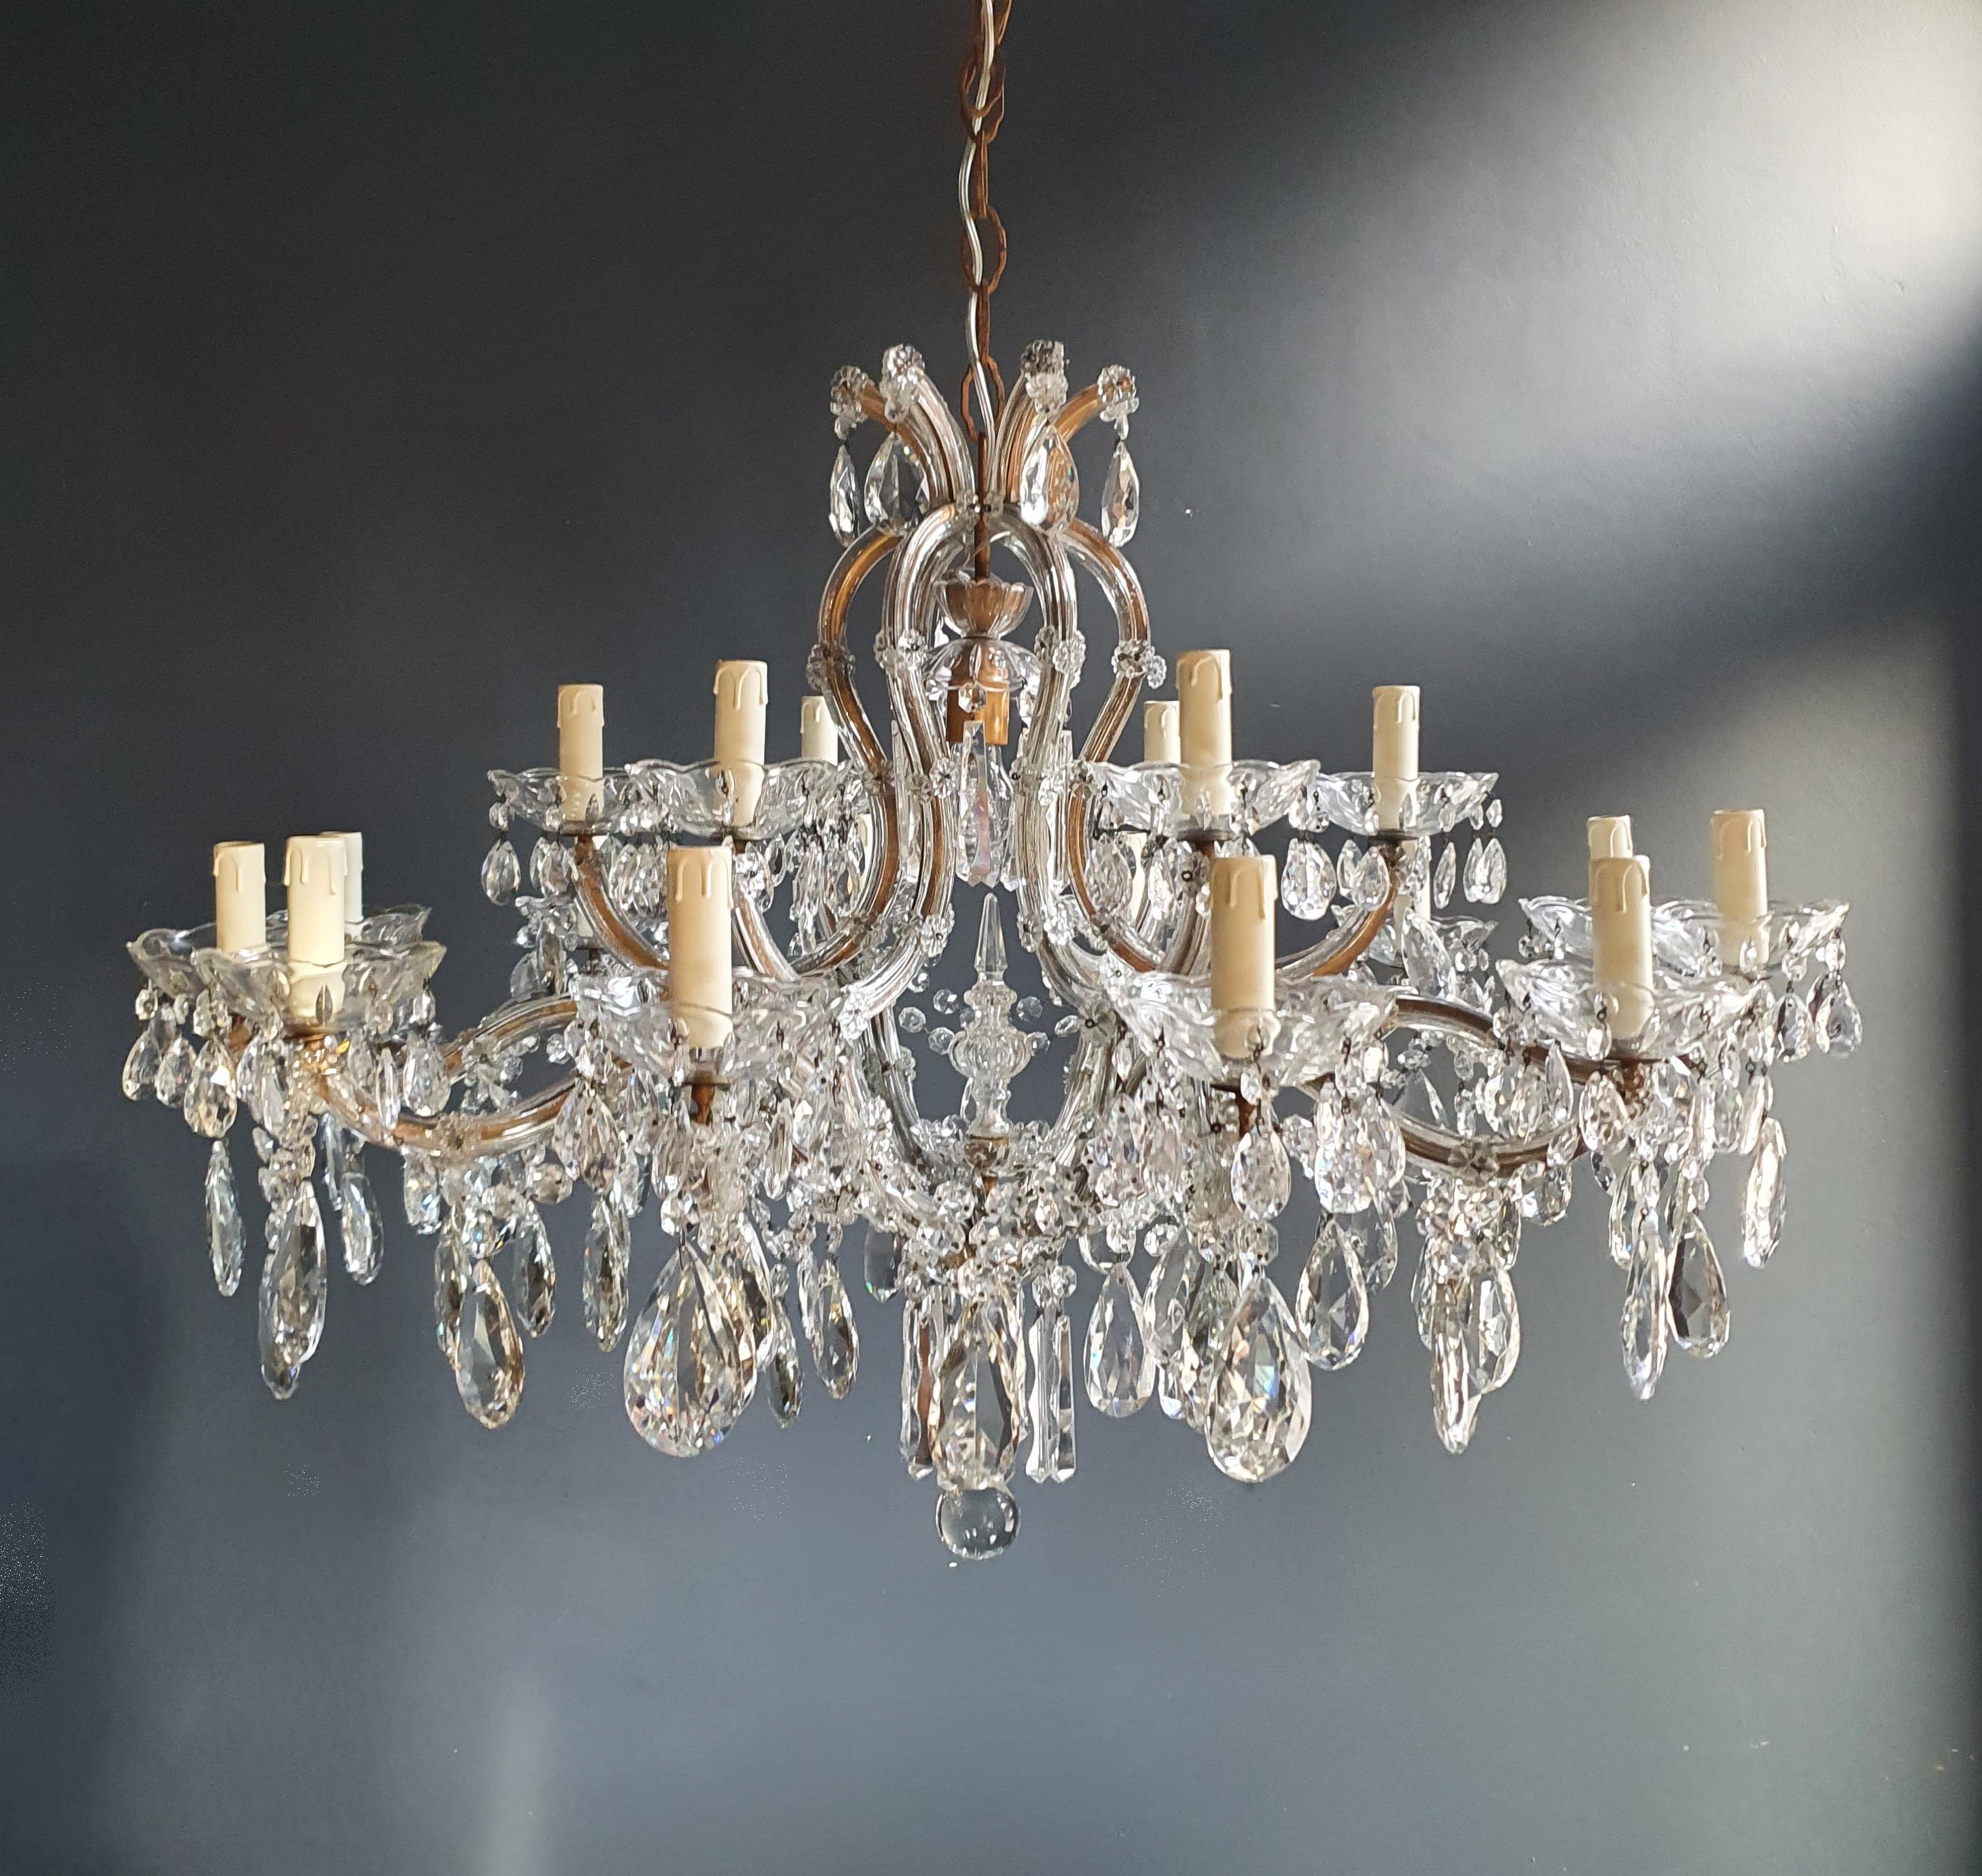 Maria Theresa Crystal Chandelier Antique Ceiling Lamp Luster Art Nouveau 2